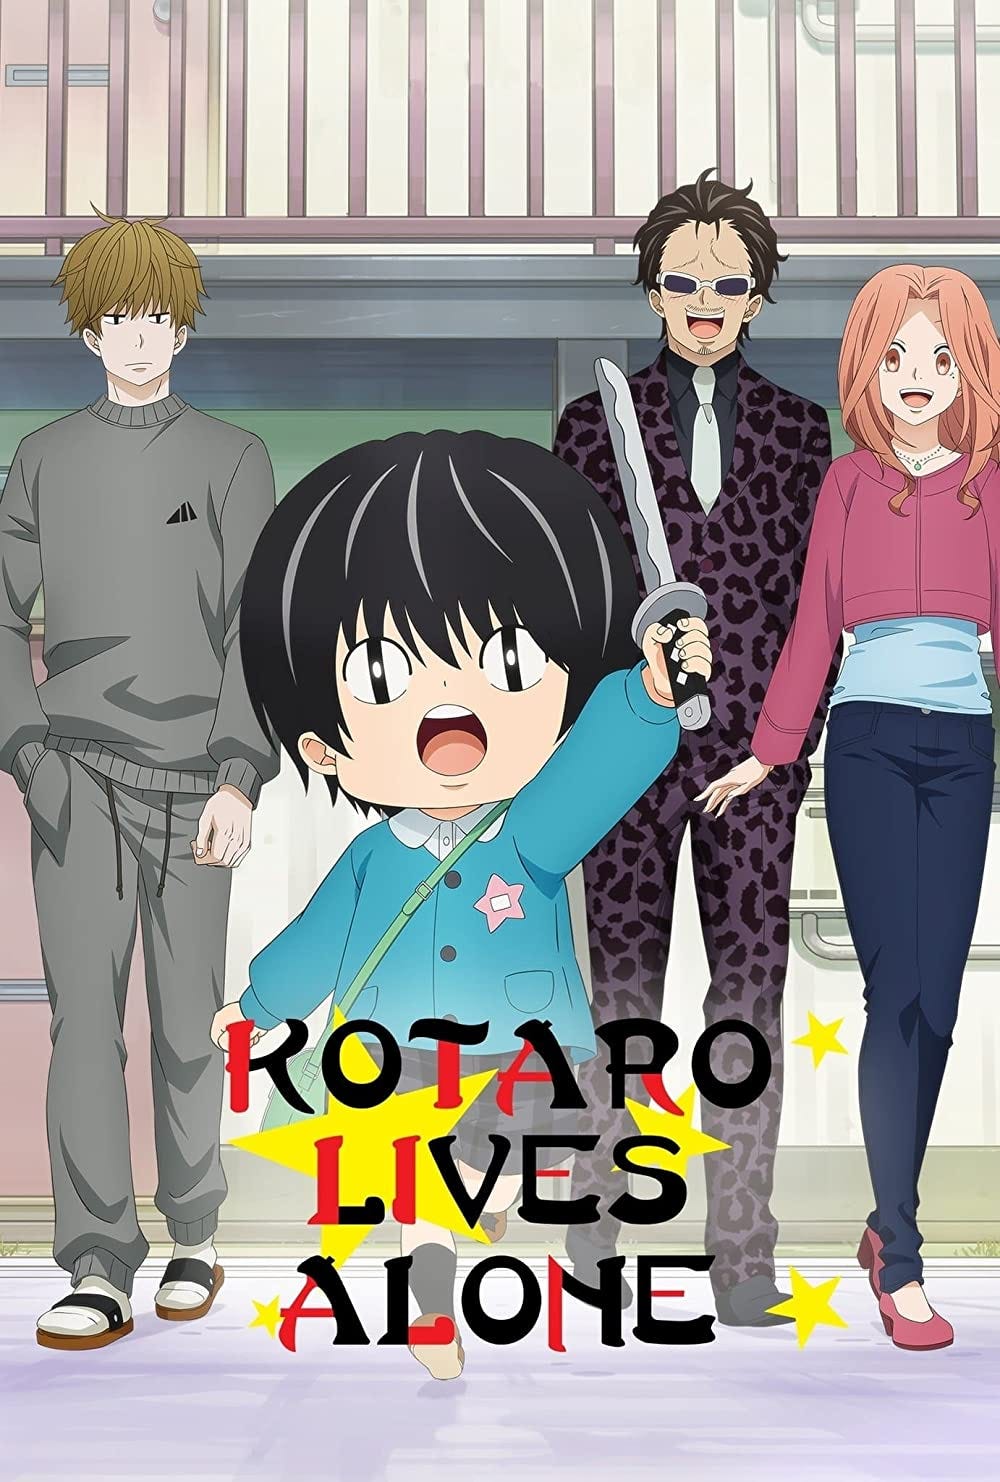 The poster of the anime, Kotaro Lives Alone. In the foreground, an adorable four year old boy enthusiastically thrusts a toy sword into the air while two men and a woman happily stand behind him.